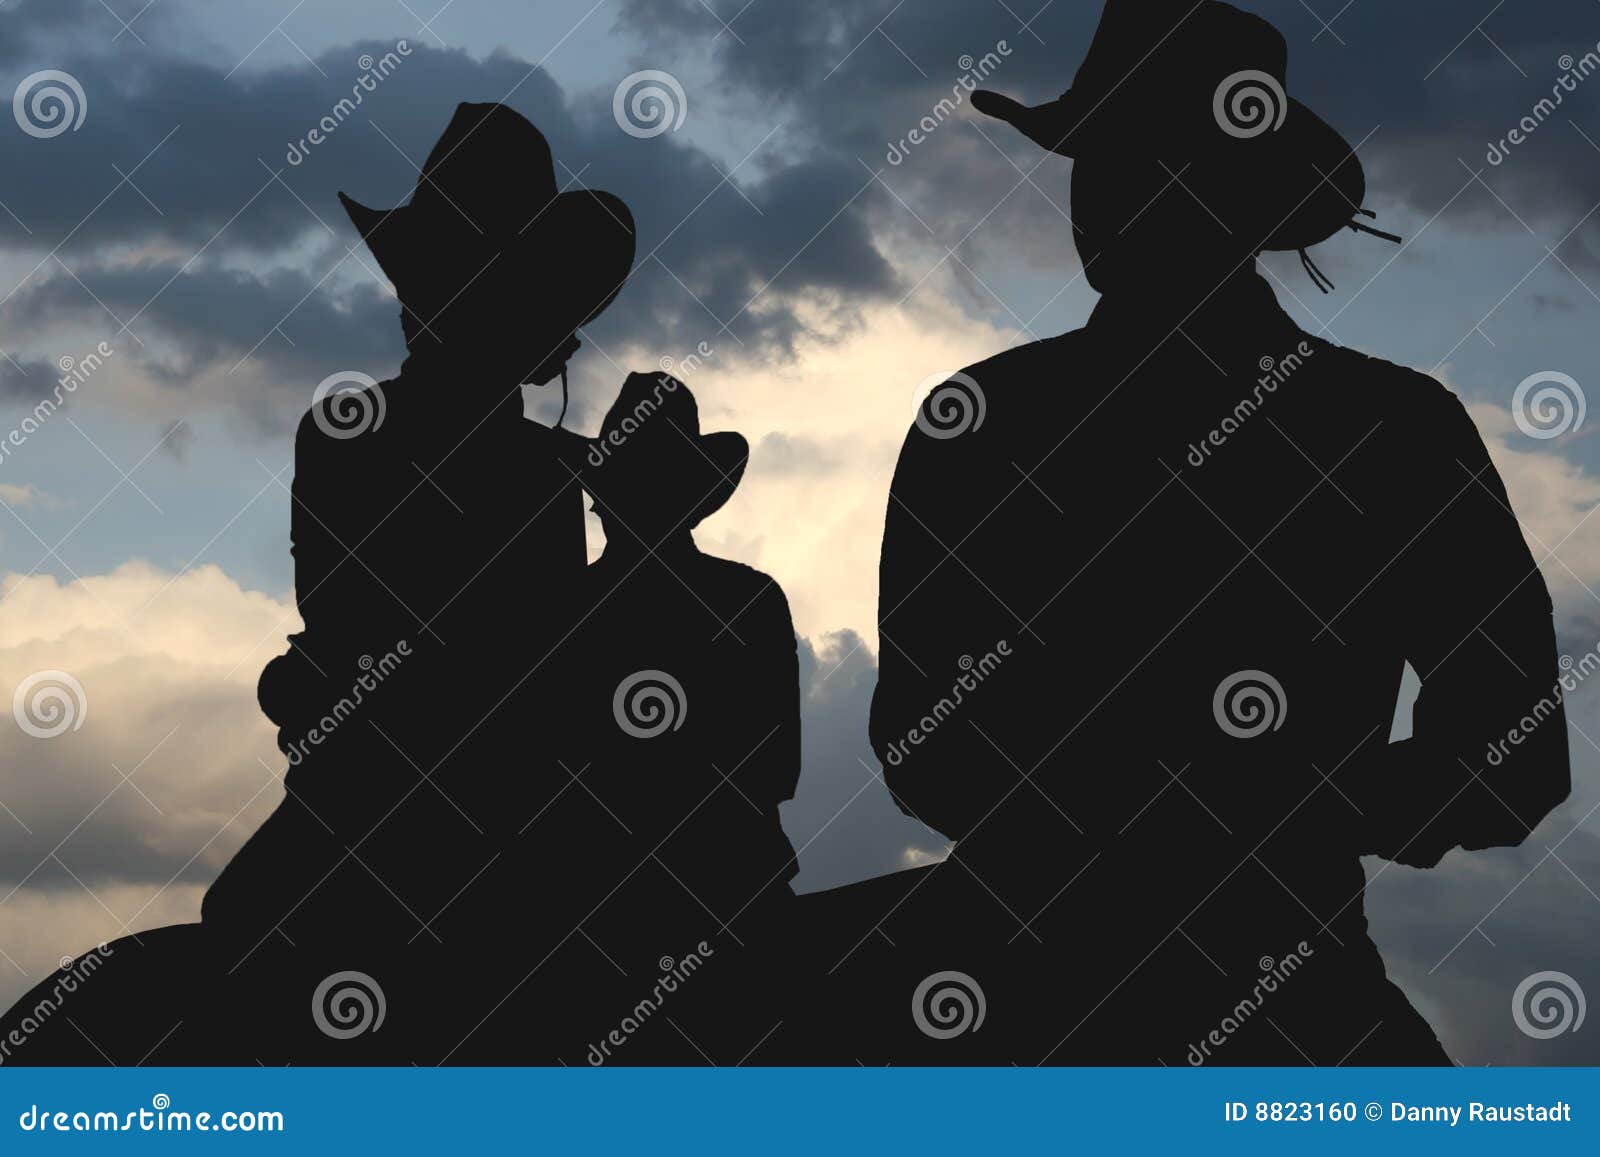 cowboys in the morning silhouette